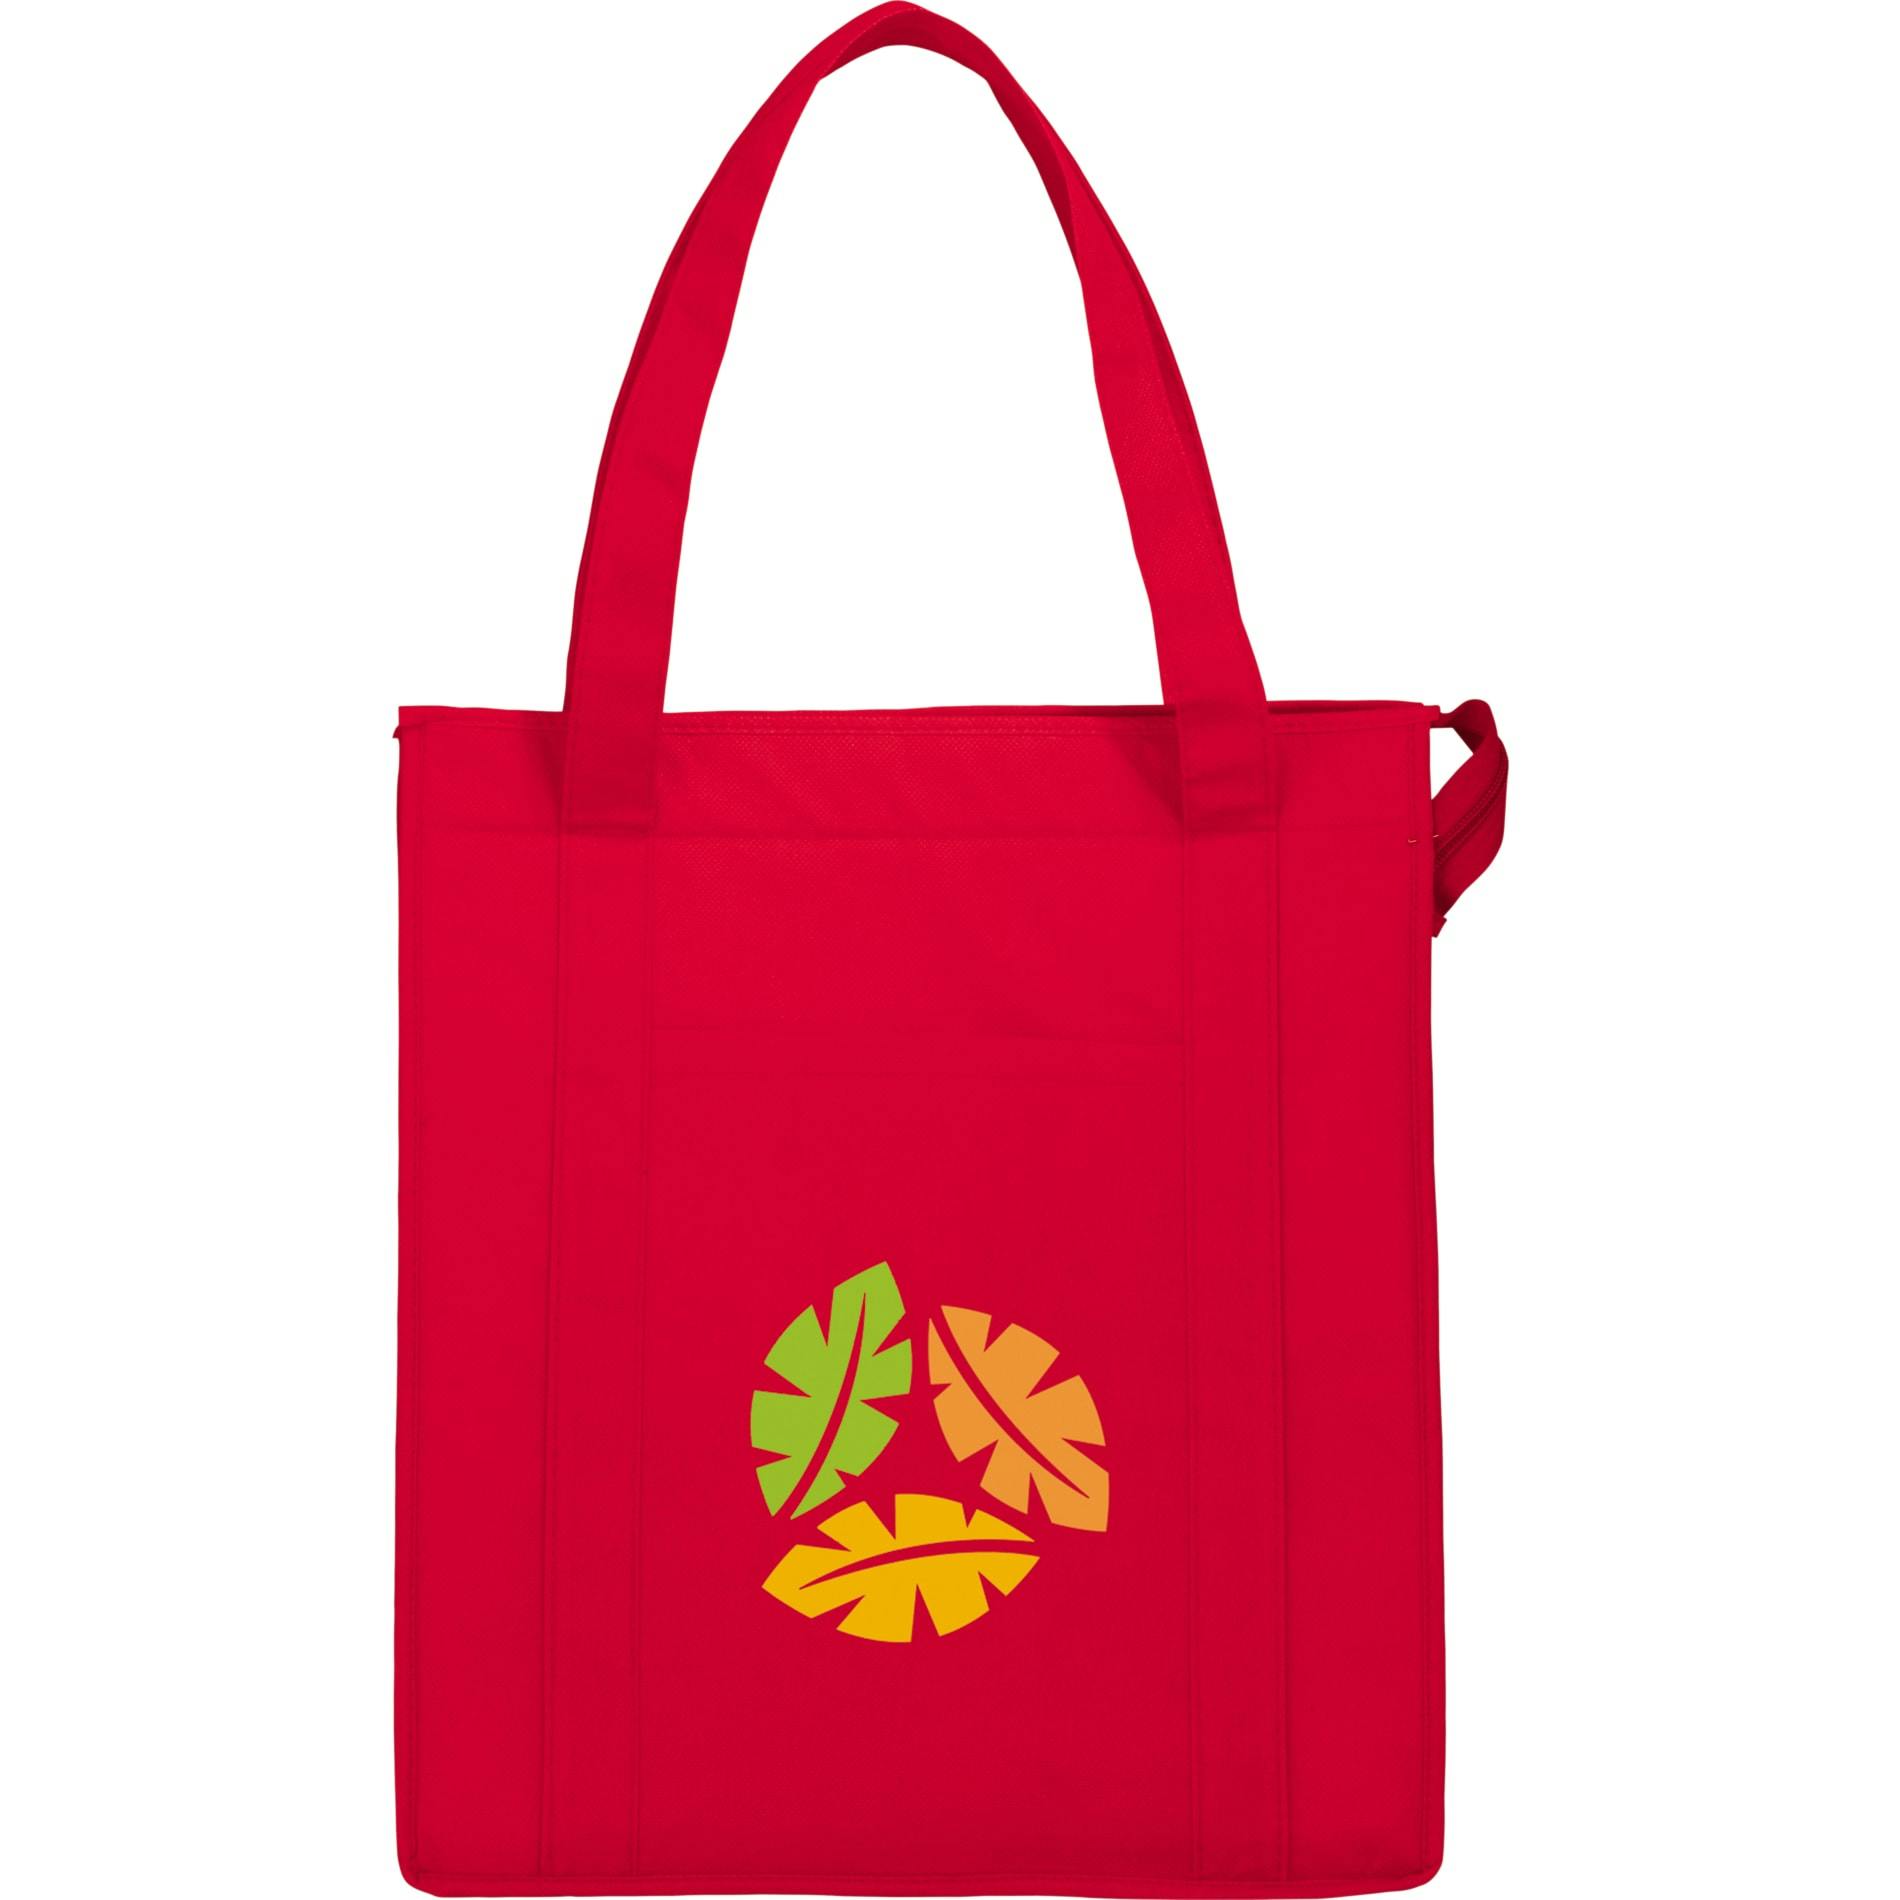 Hercules Insulated Grocery Tote - additional Image 2